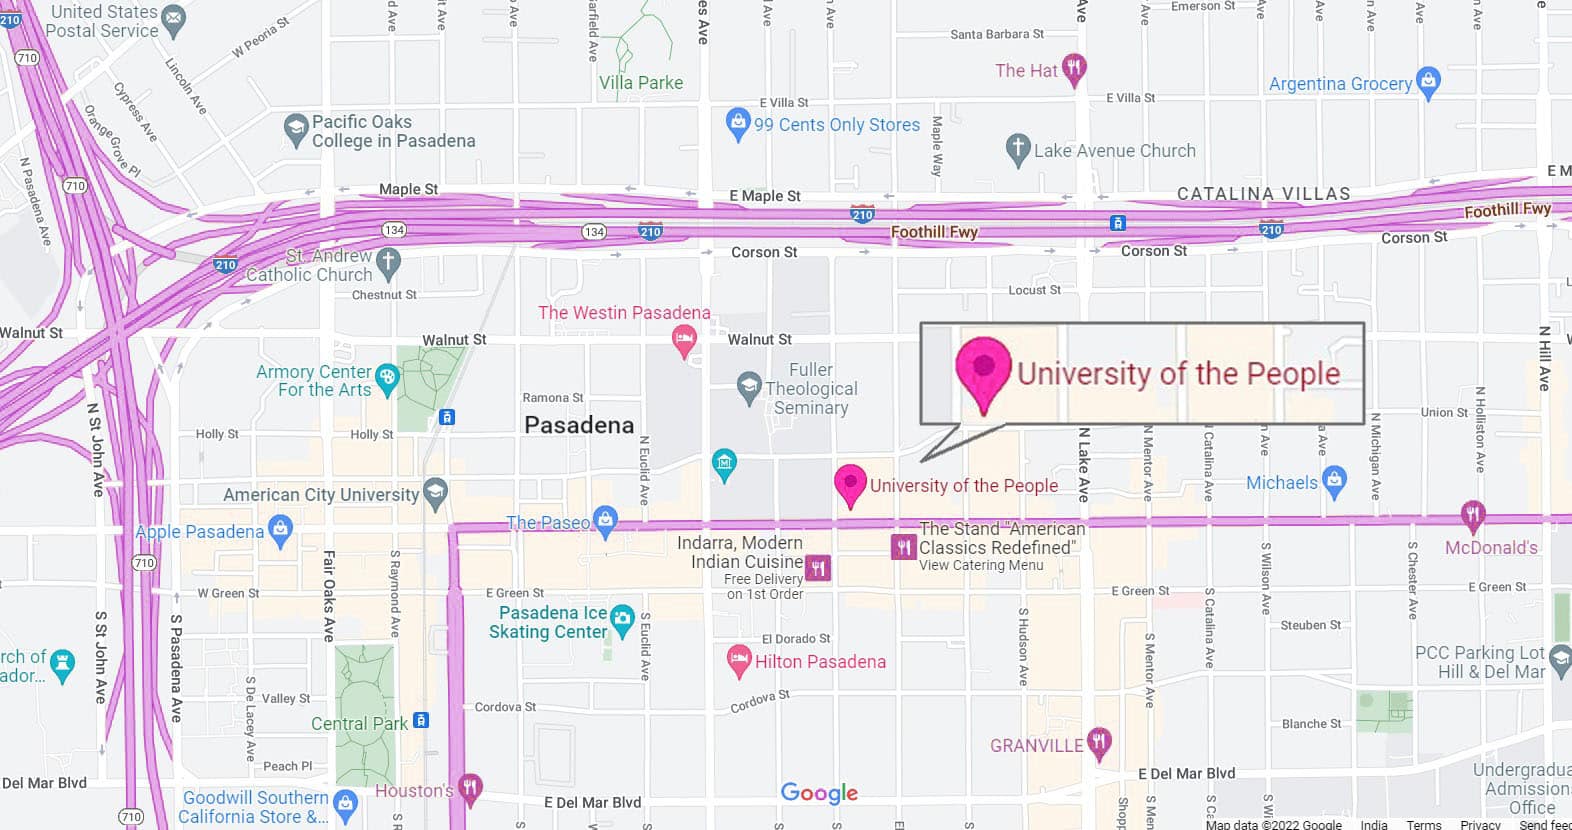 UoPeople Location